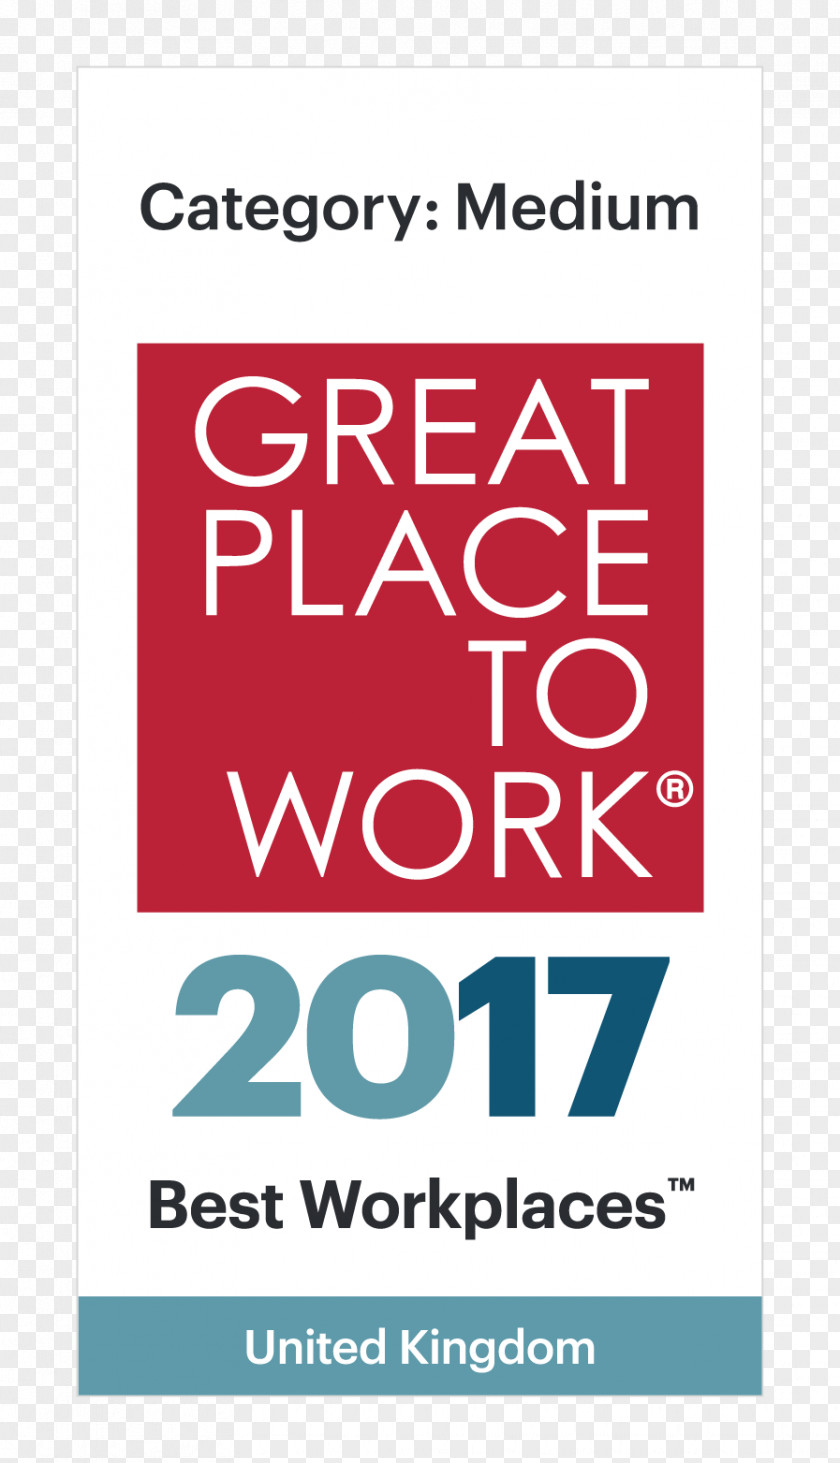 Business Lindon Organization Great Place To Work Workplace Fortune PNG